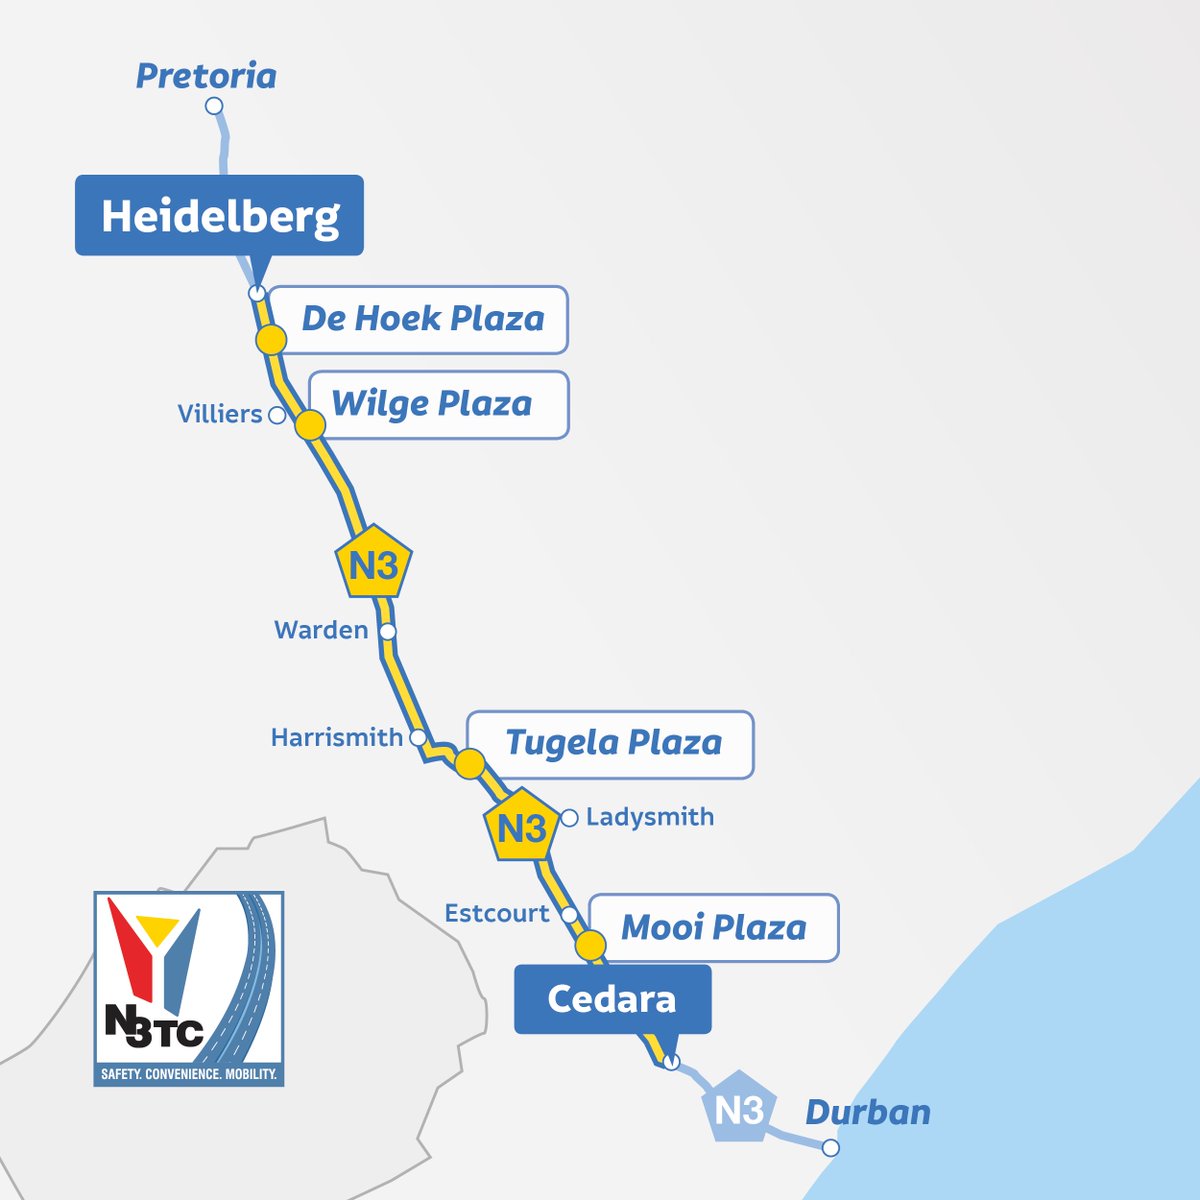 12h05 01/05 #N3Weather: Clear conditions along the #N3TollRoute from Cedara I/C 96 to Heidelberg I/C 59. Please drive safely and take care. (02)